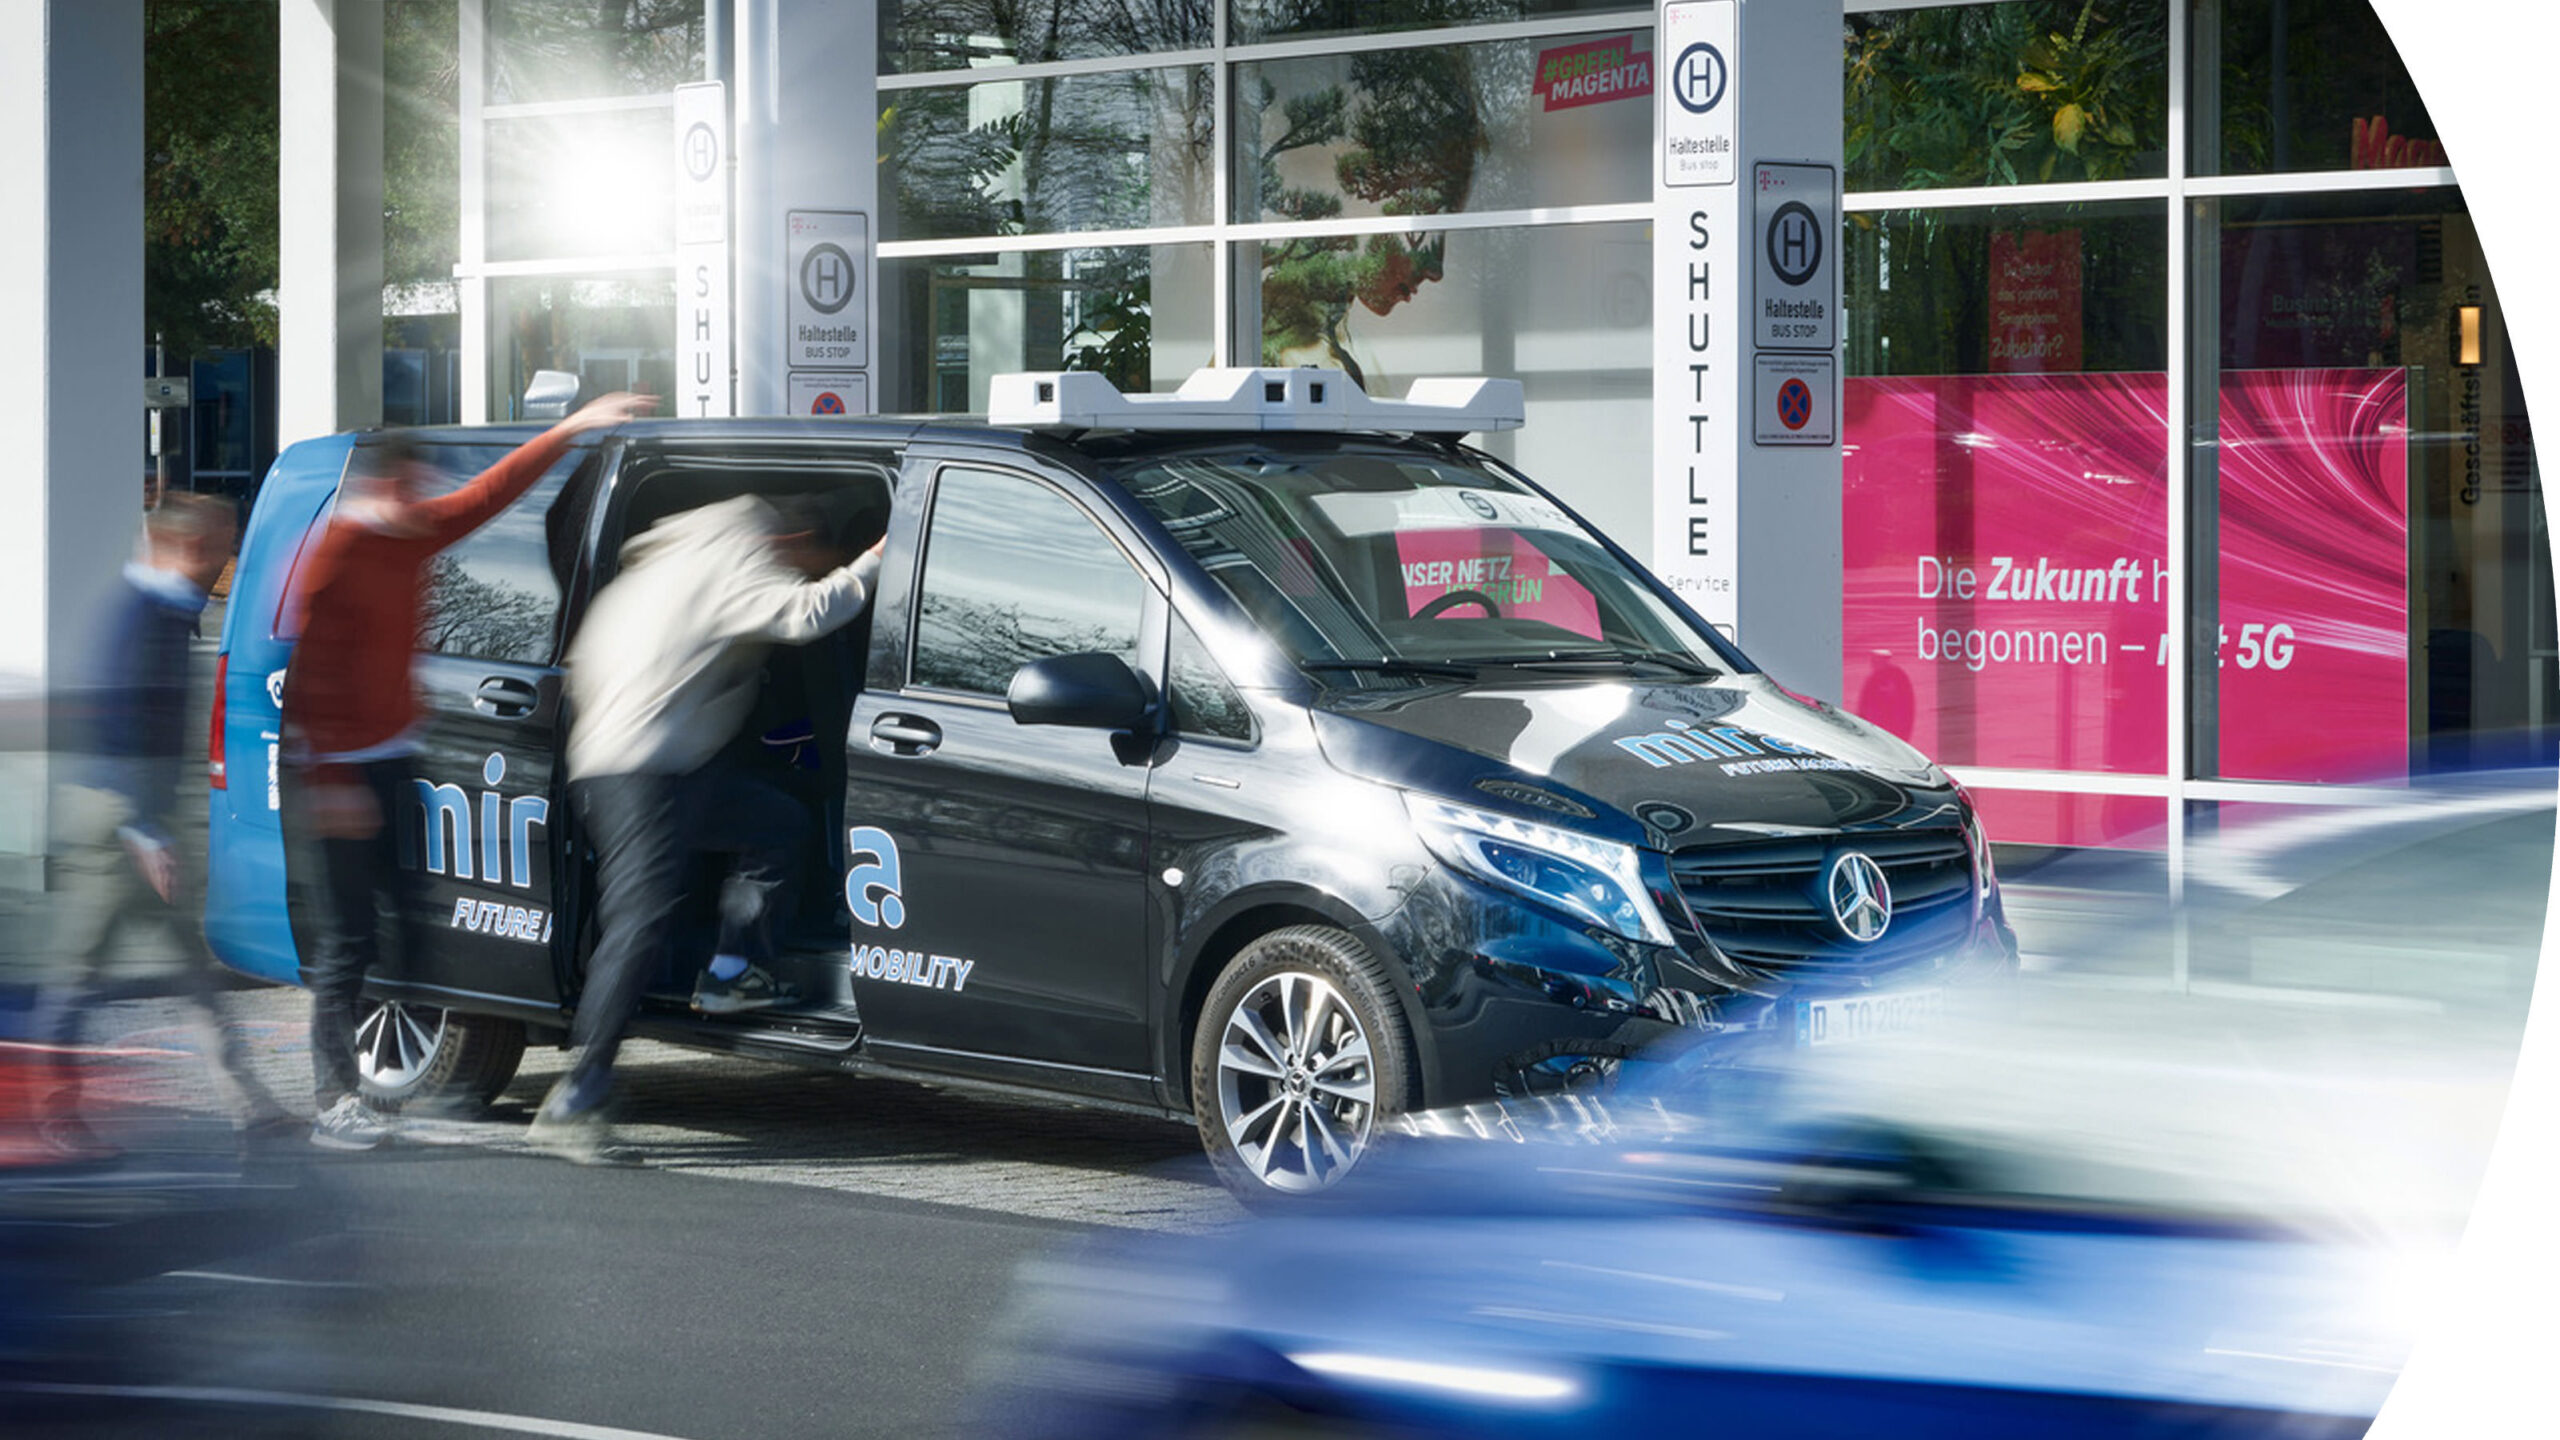 Together with Deutsche Telekom AG, MIRA GmbH has launched a joint pilot project for teleoperated driving